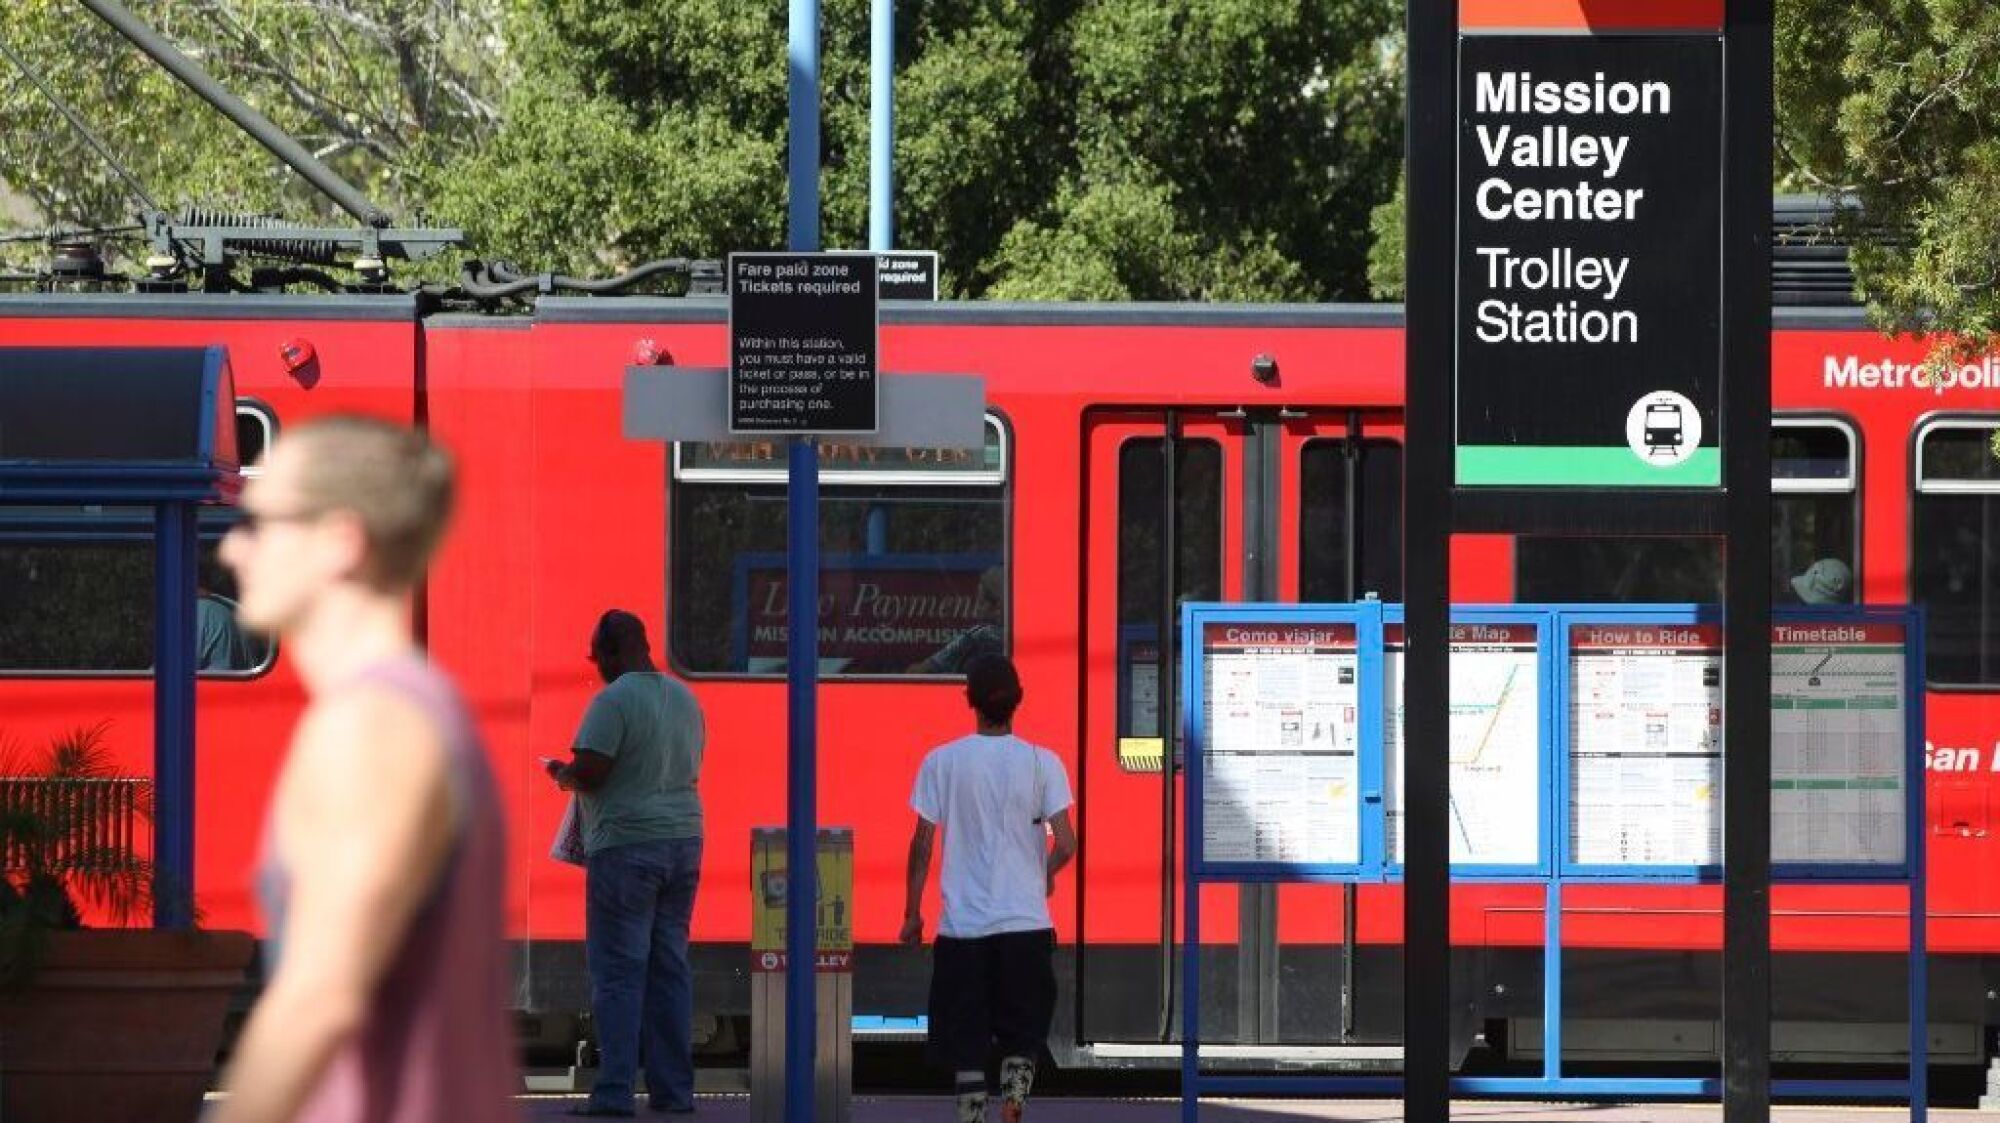 The San Diego Trolley arrives at the Mission Valley Center Trolley Station.